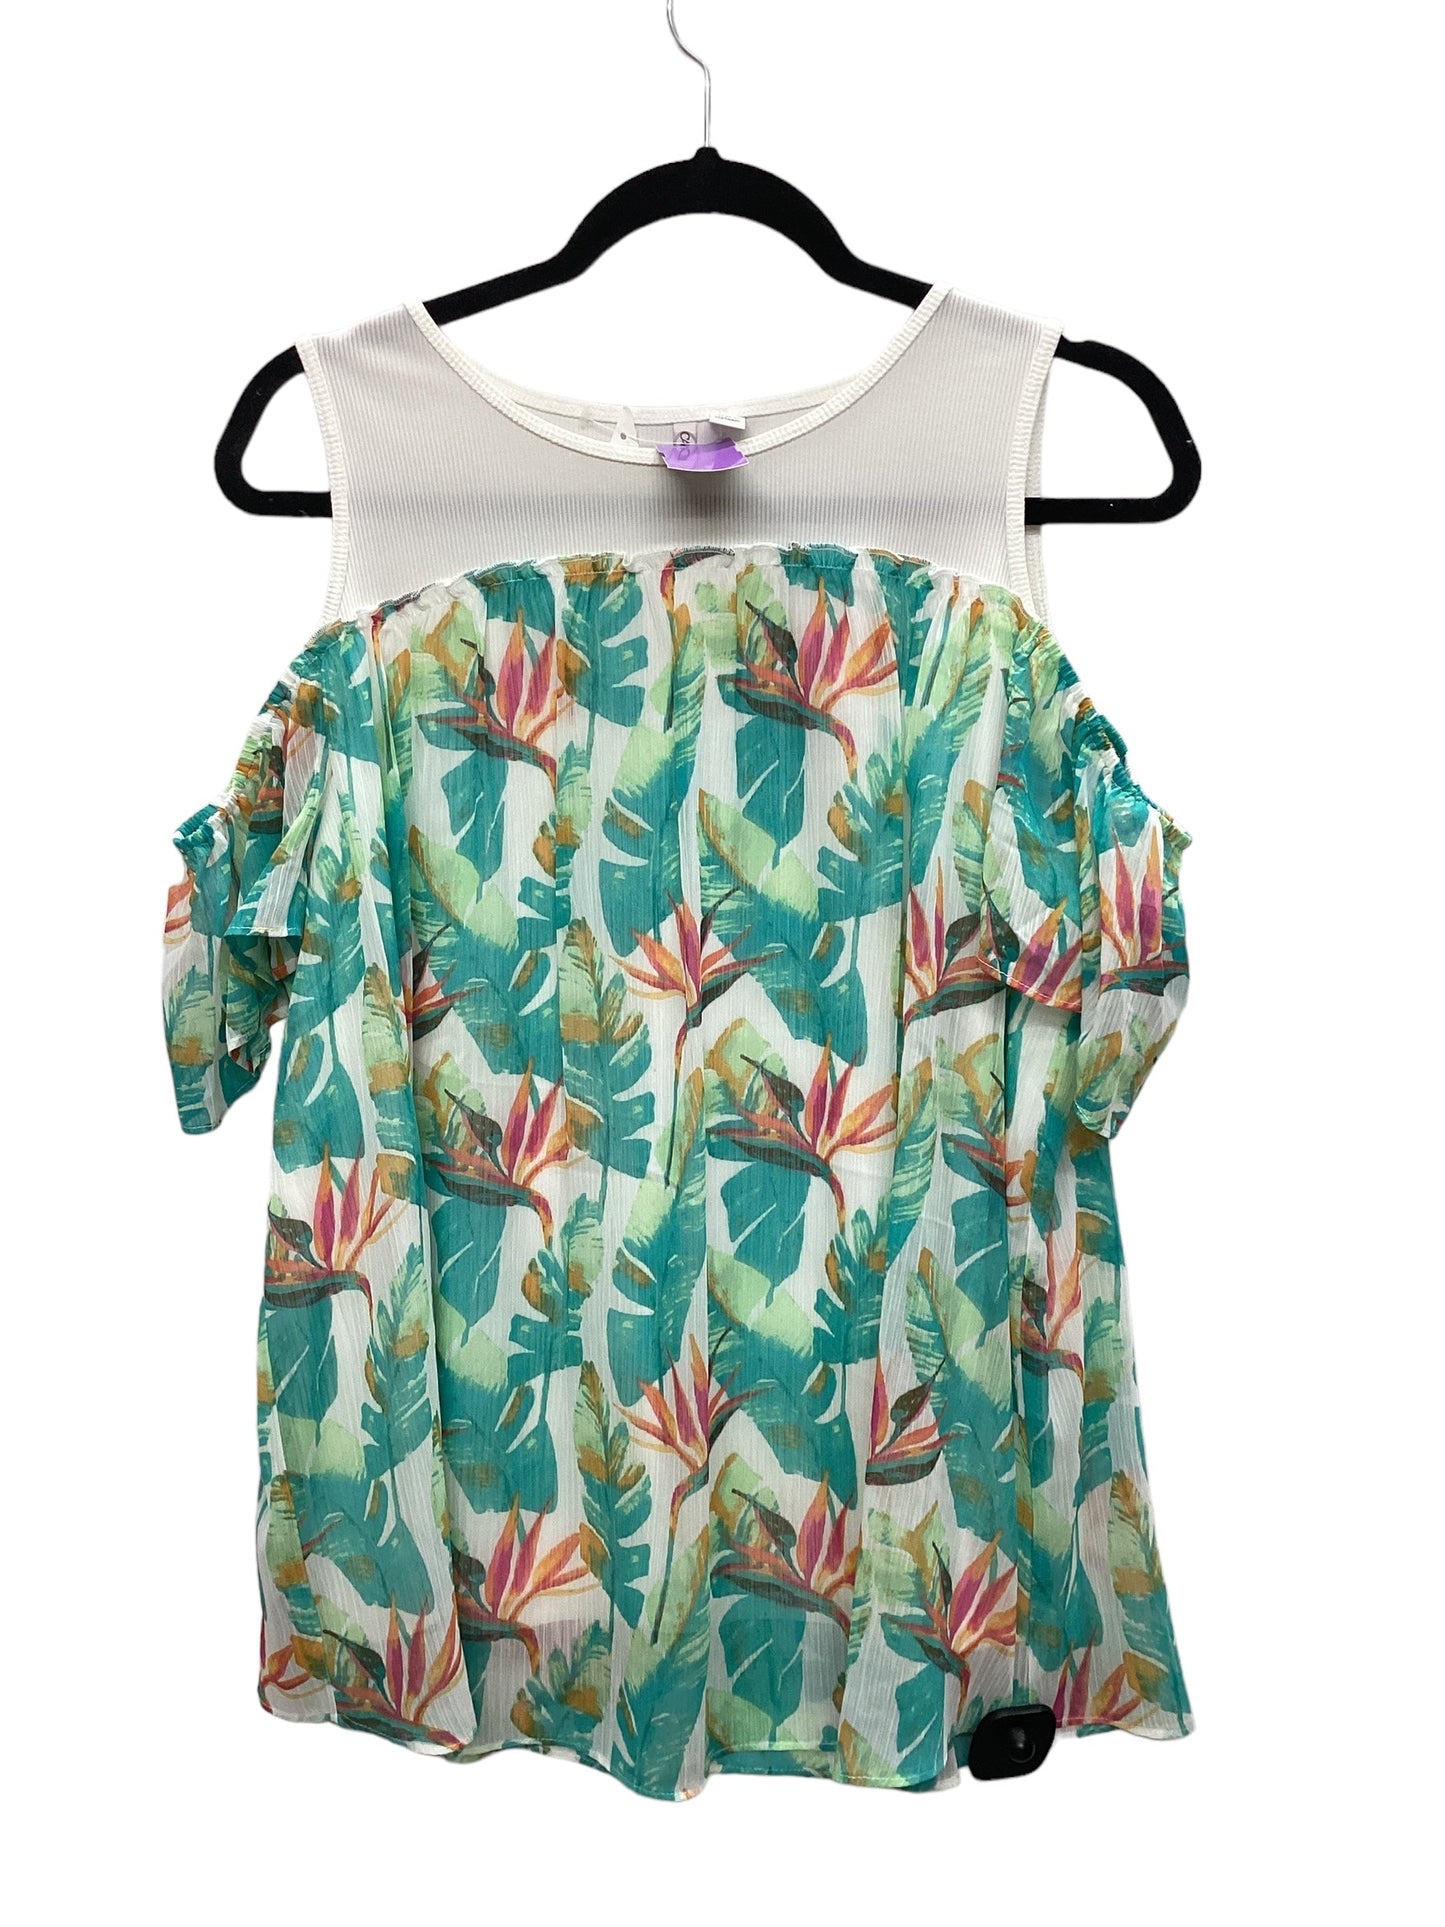 Tropical Print Top Short Sleeve Cato, Size Xl